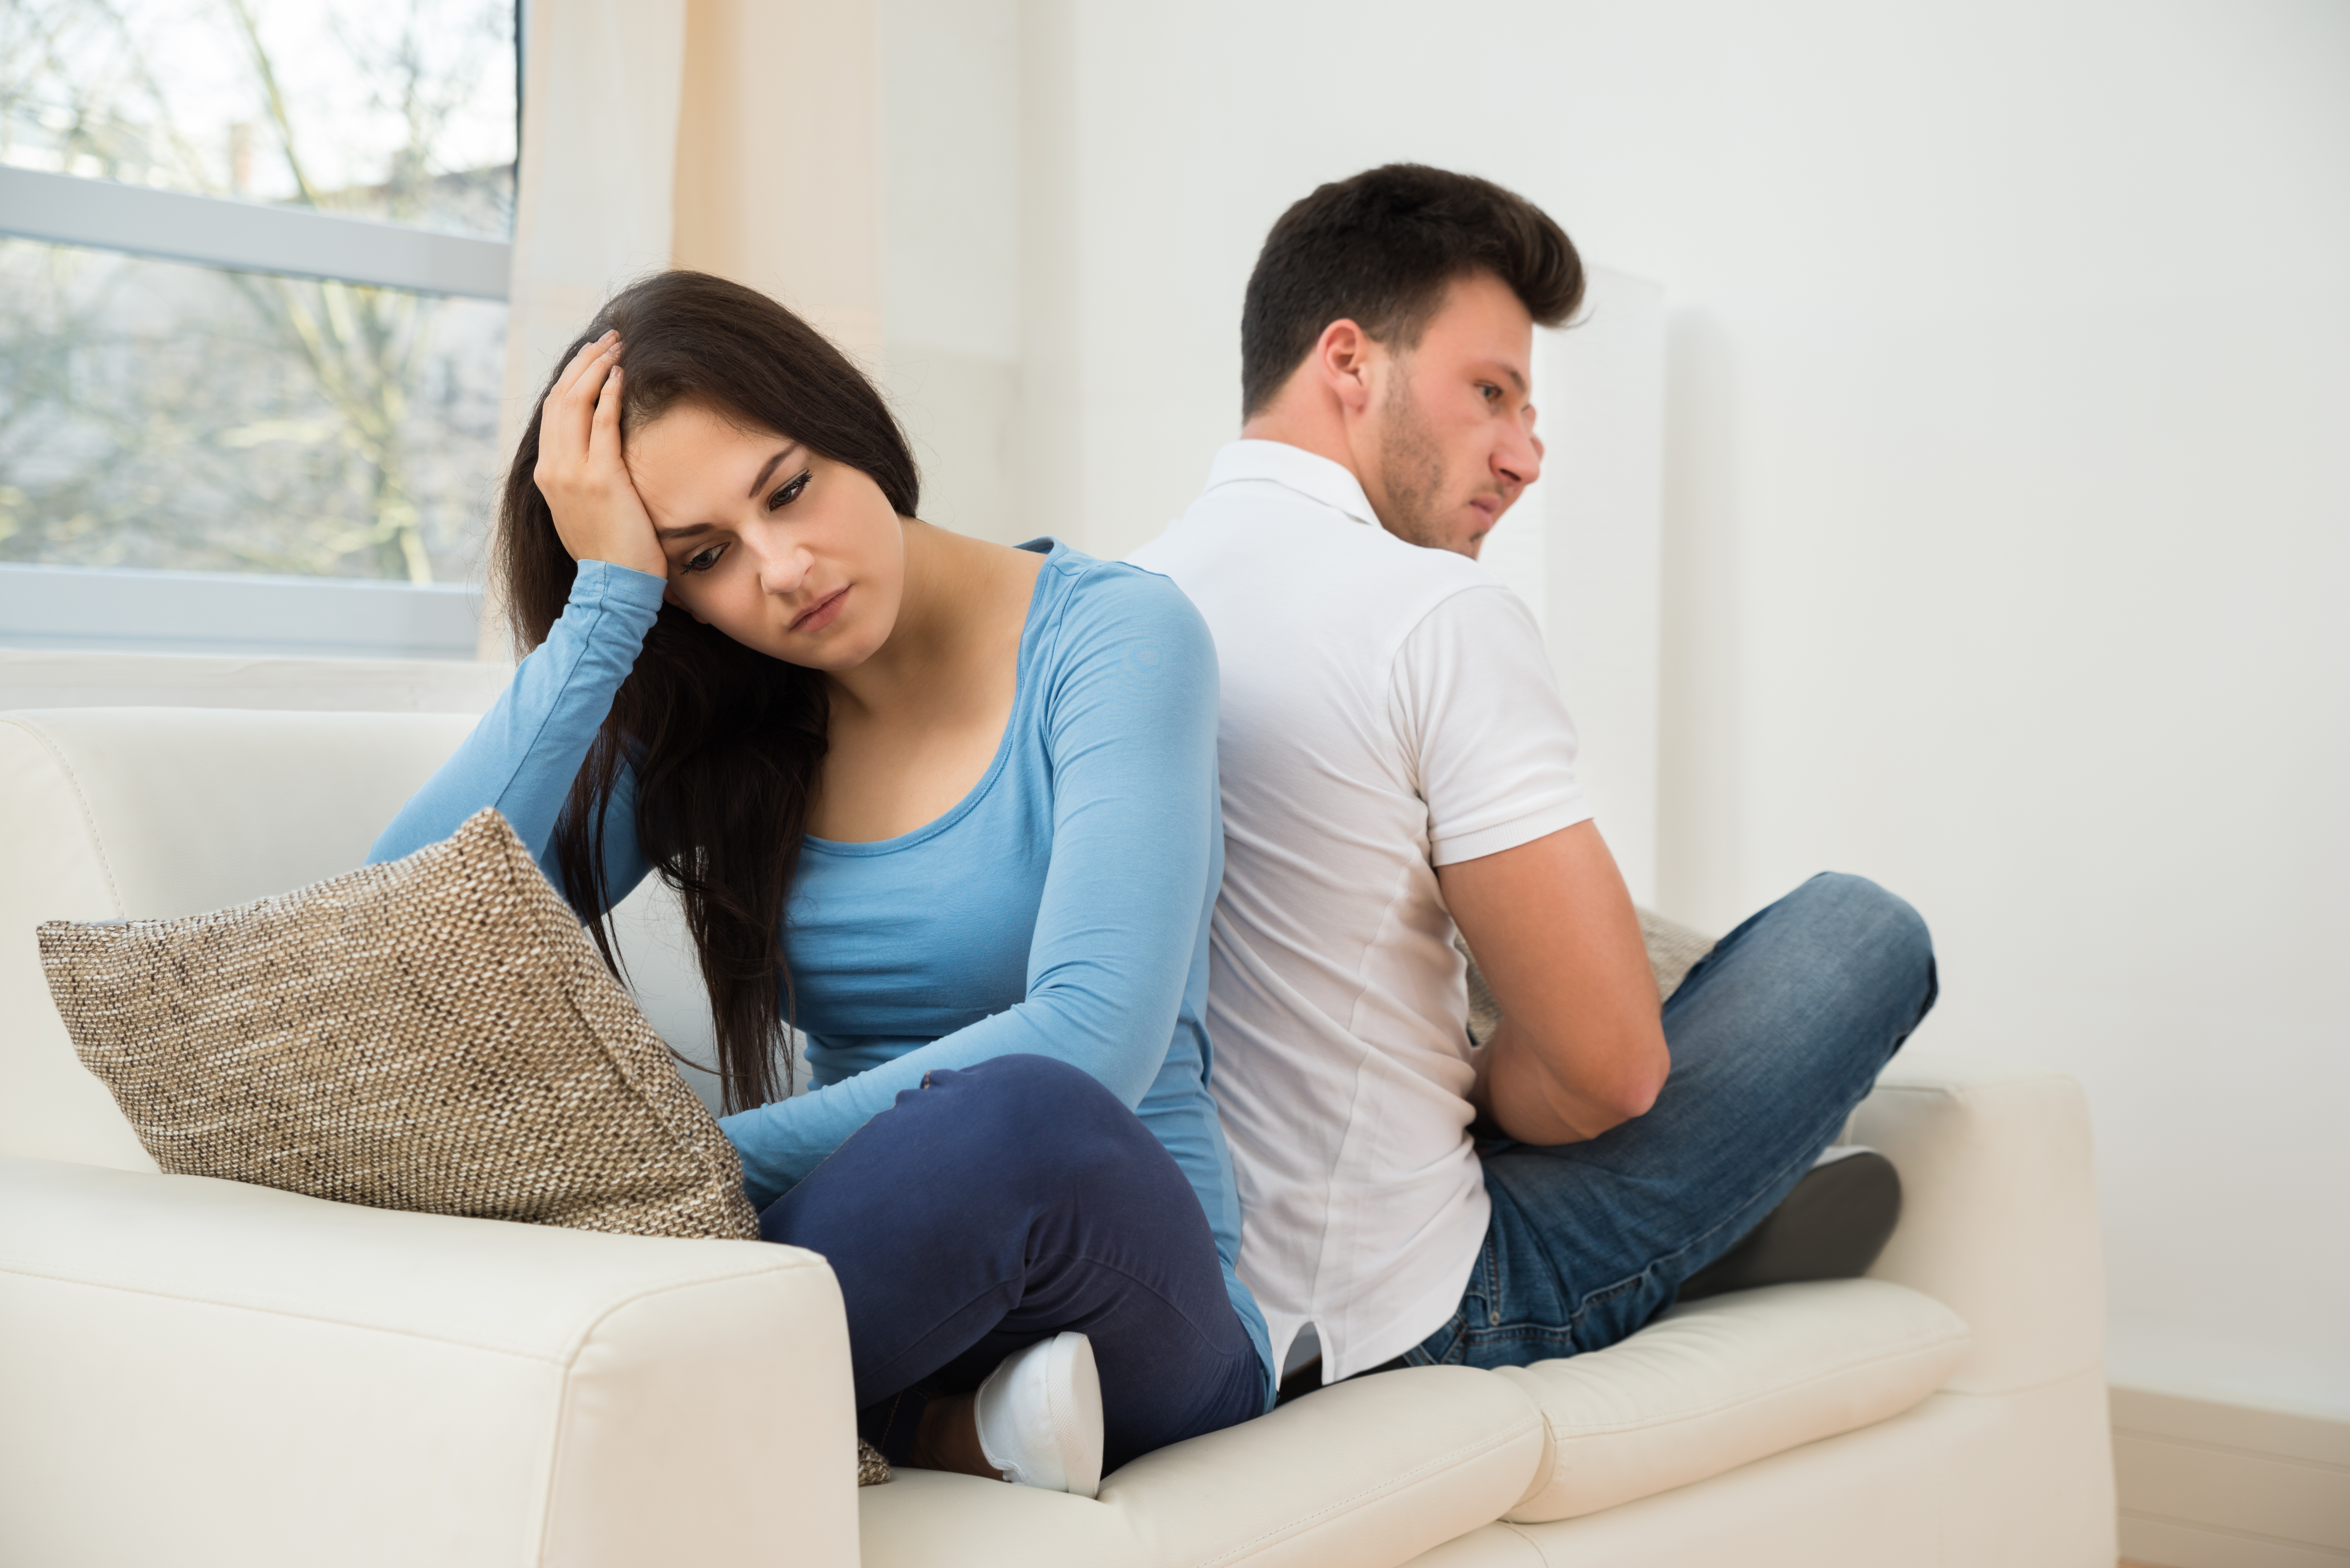 Man and woman back to back on a couch not talking | Source: Shutterstock